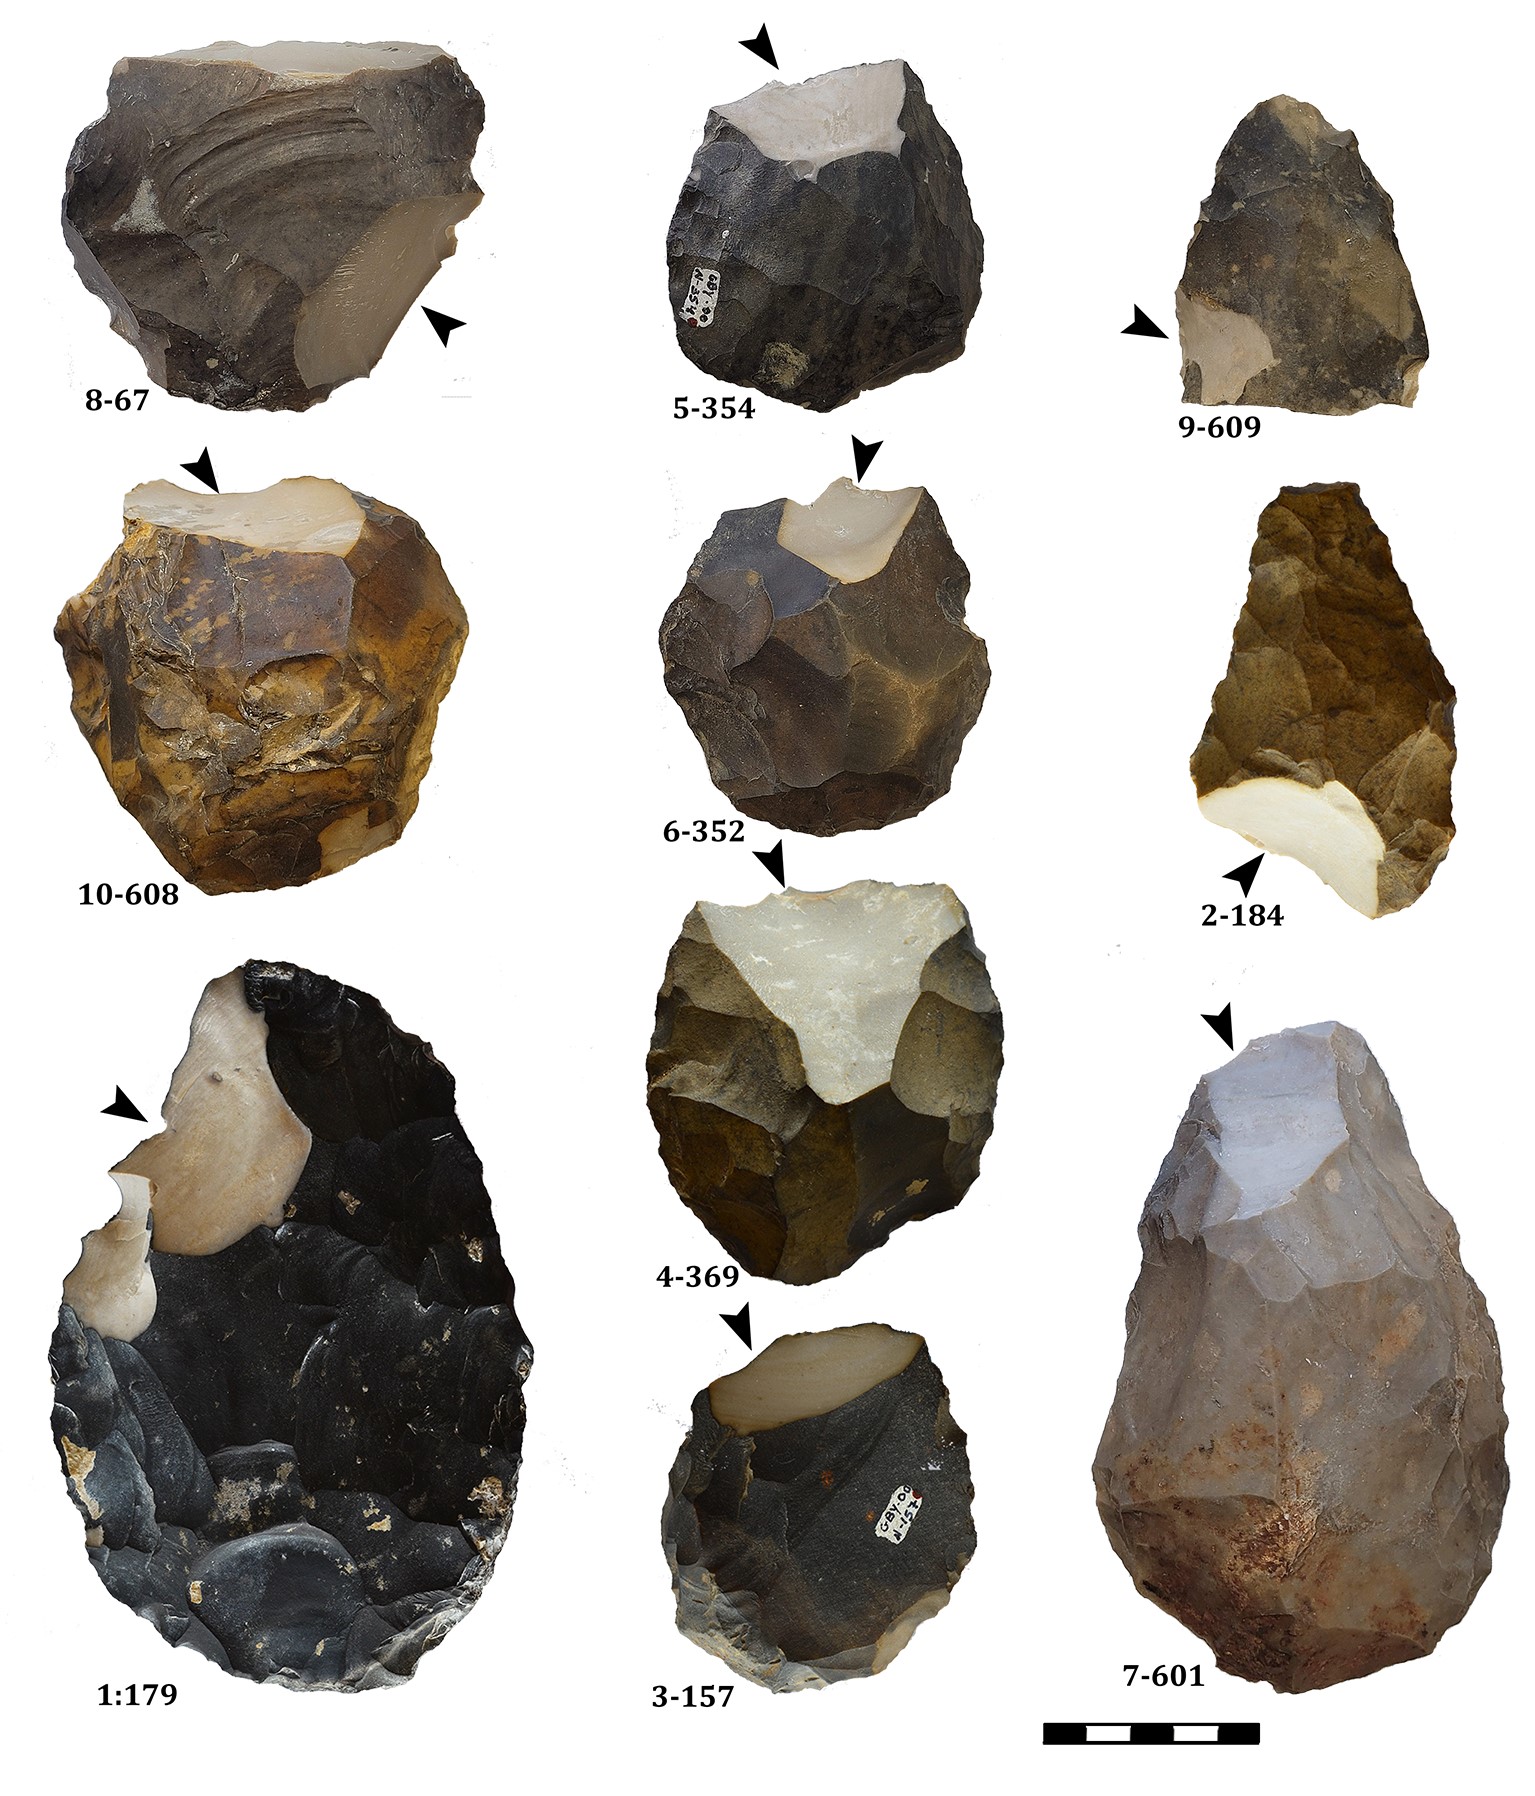 Hula Valley handaxes Early humans procurement raw materials